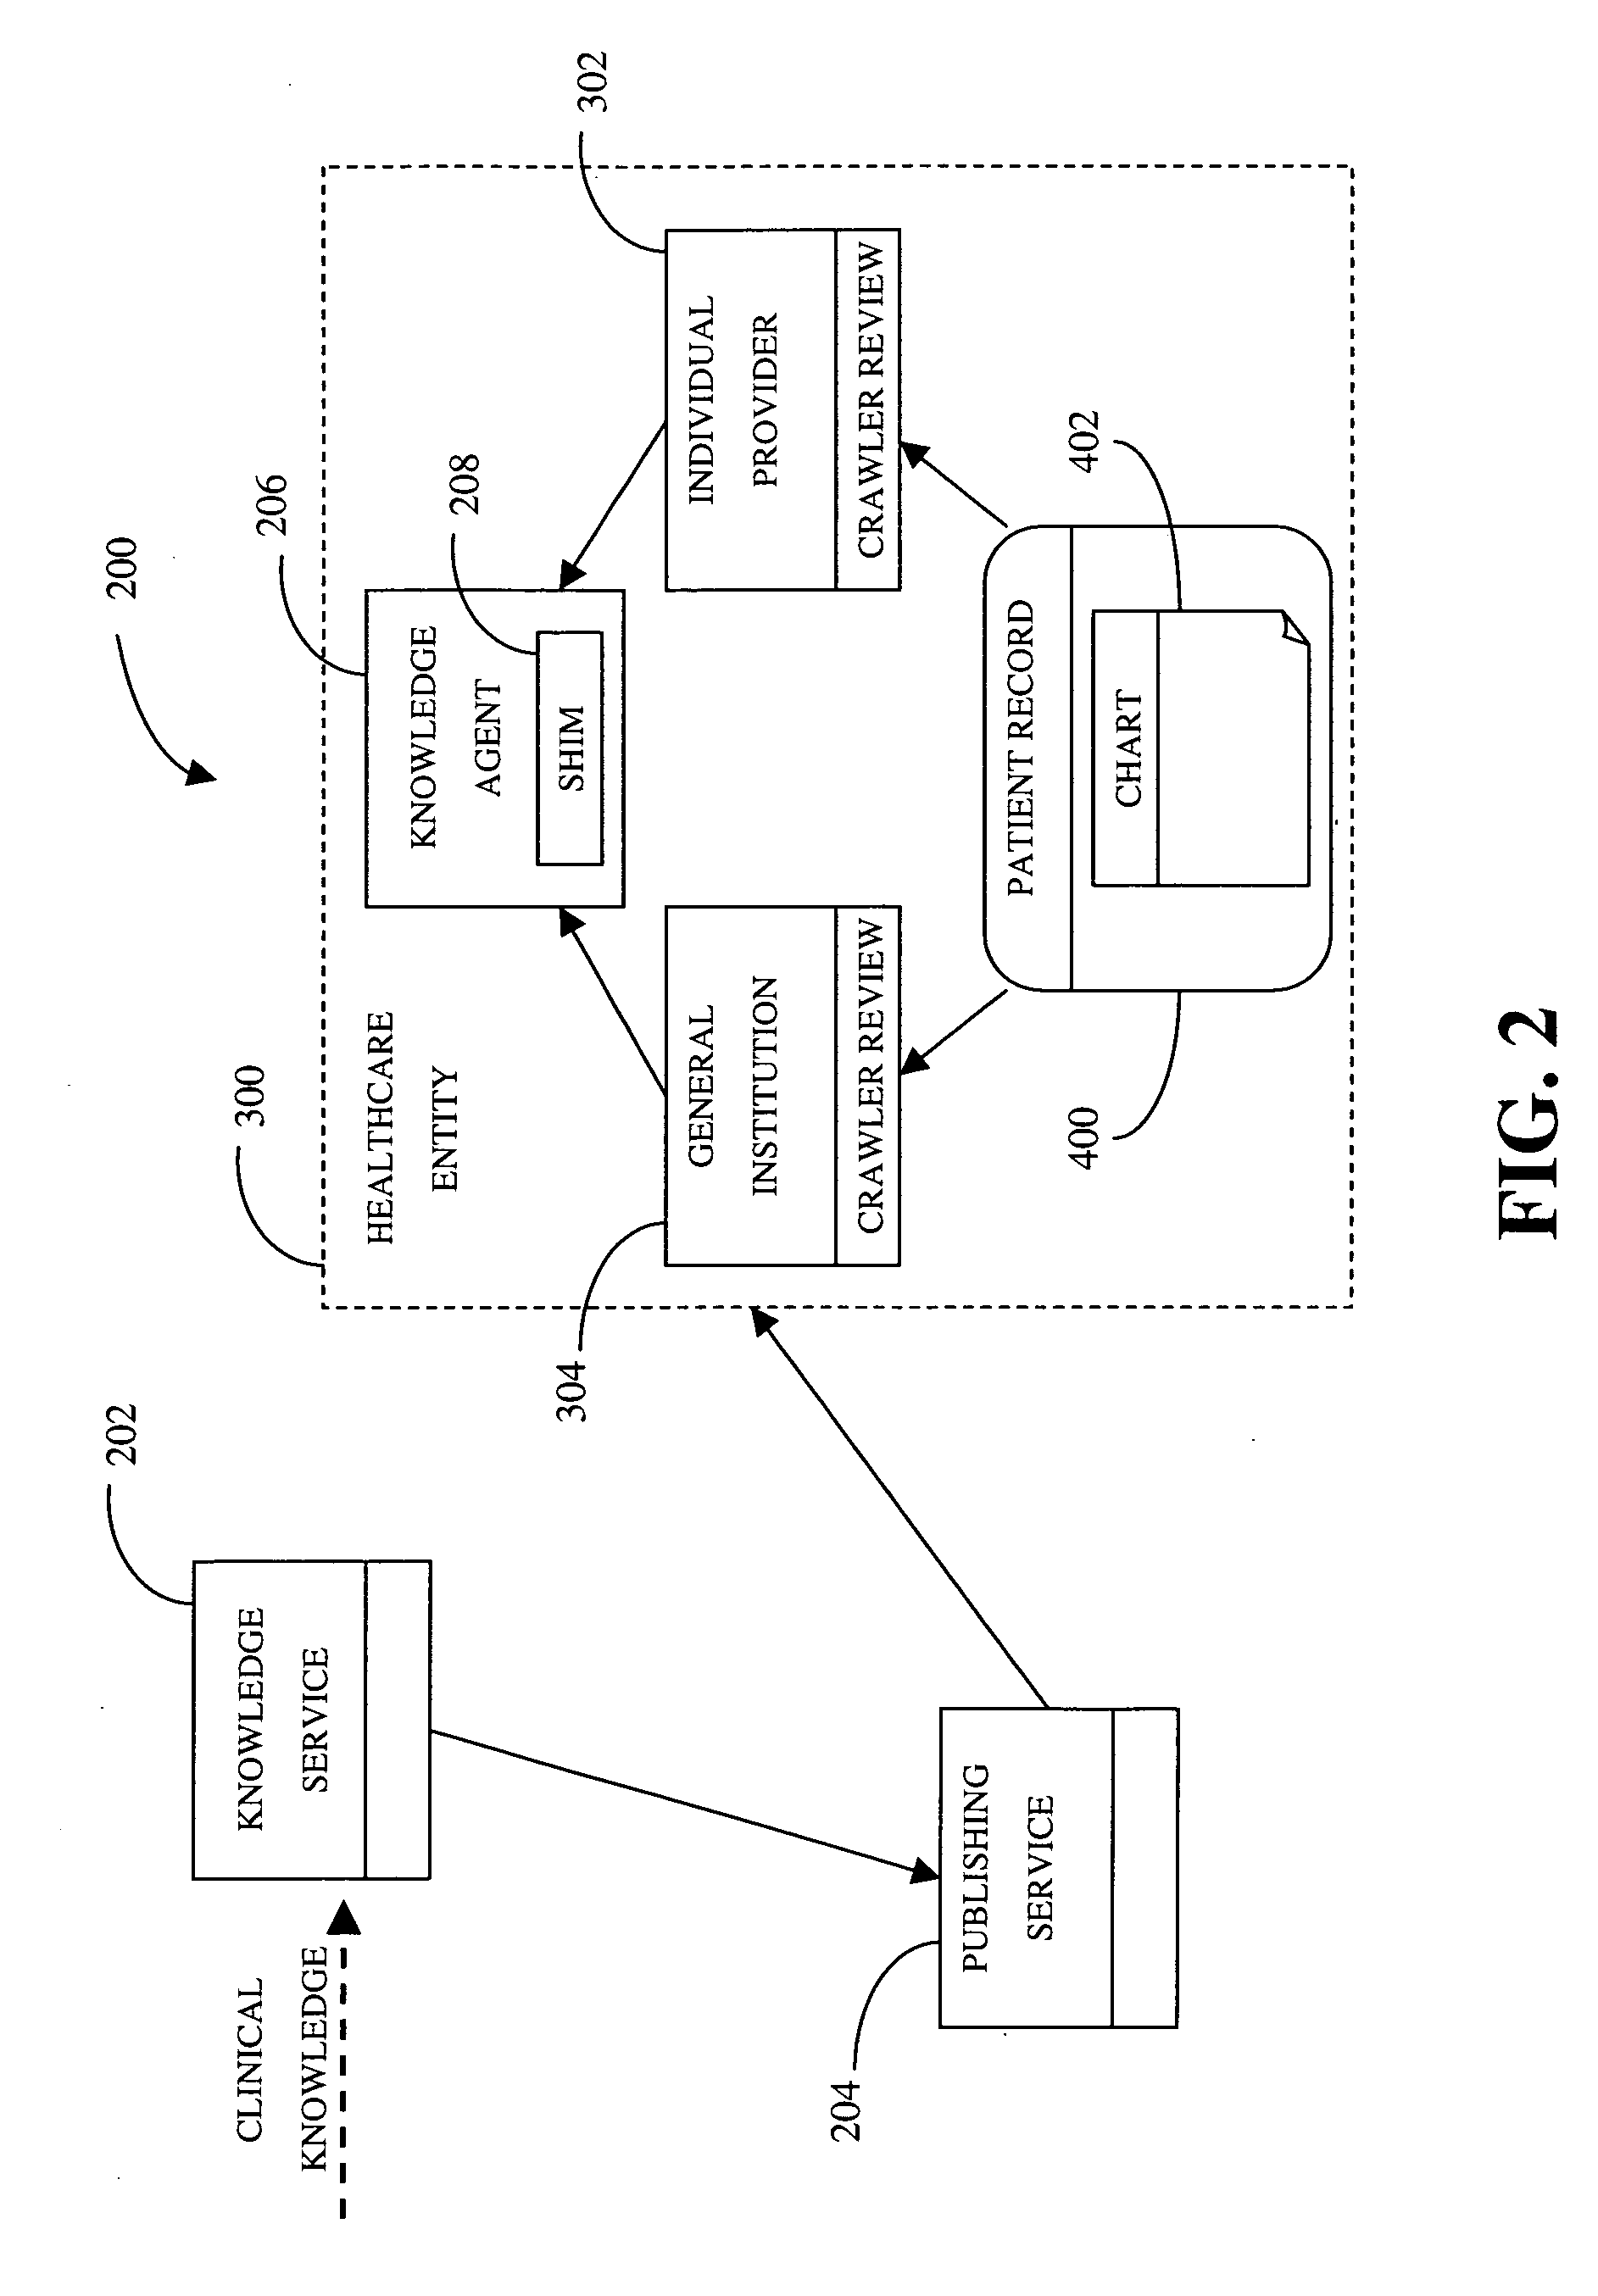 System and methods for distributed analysis of patient records